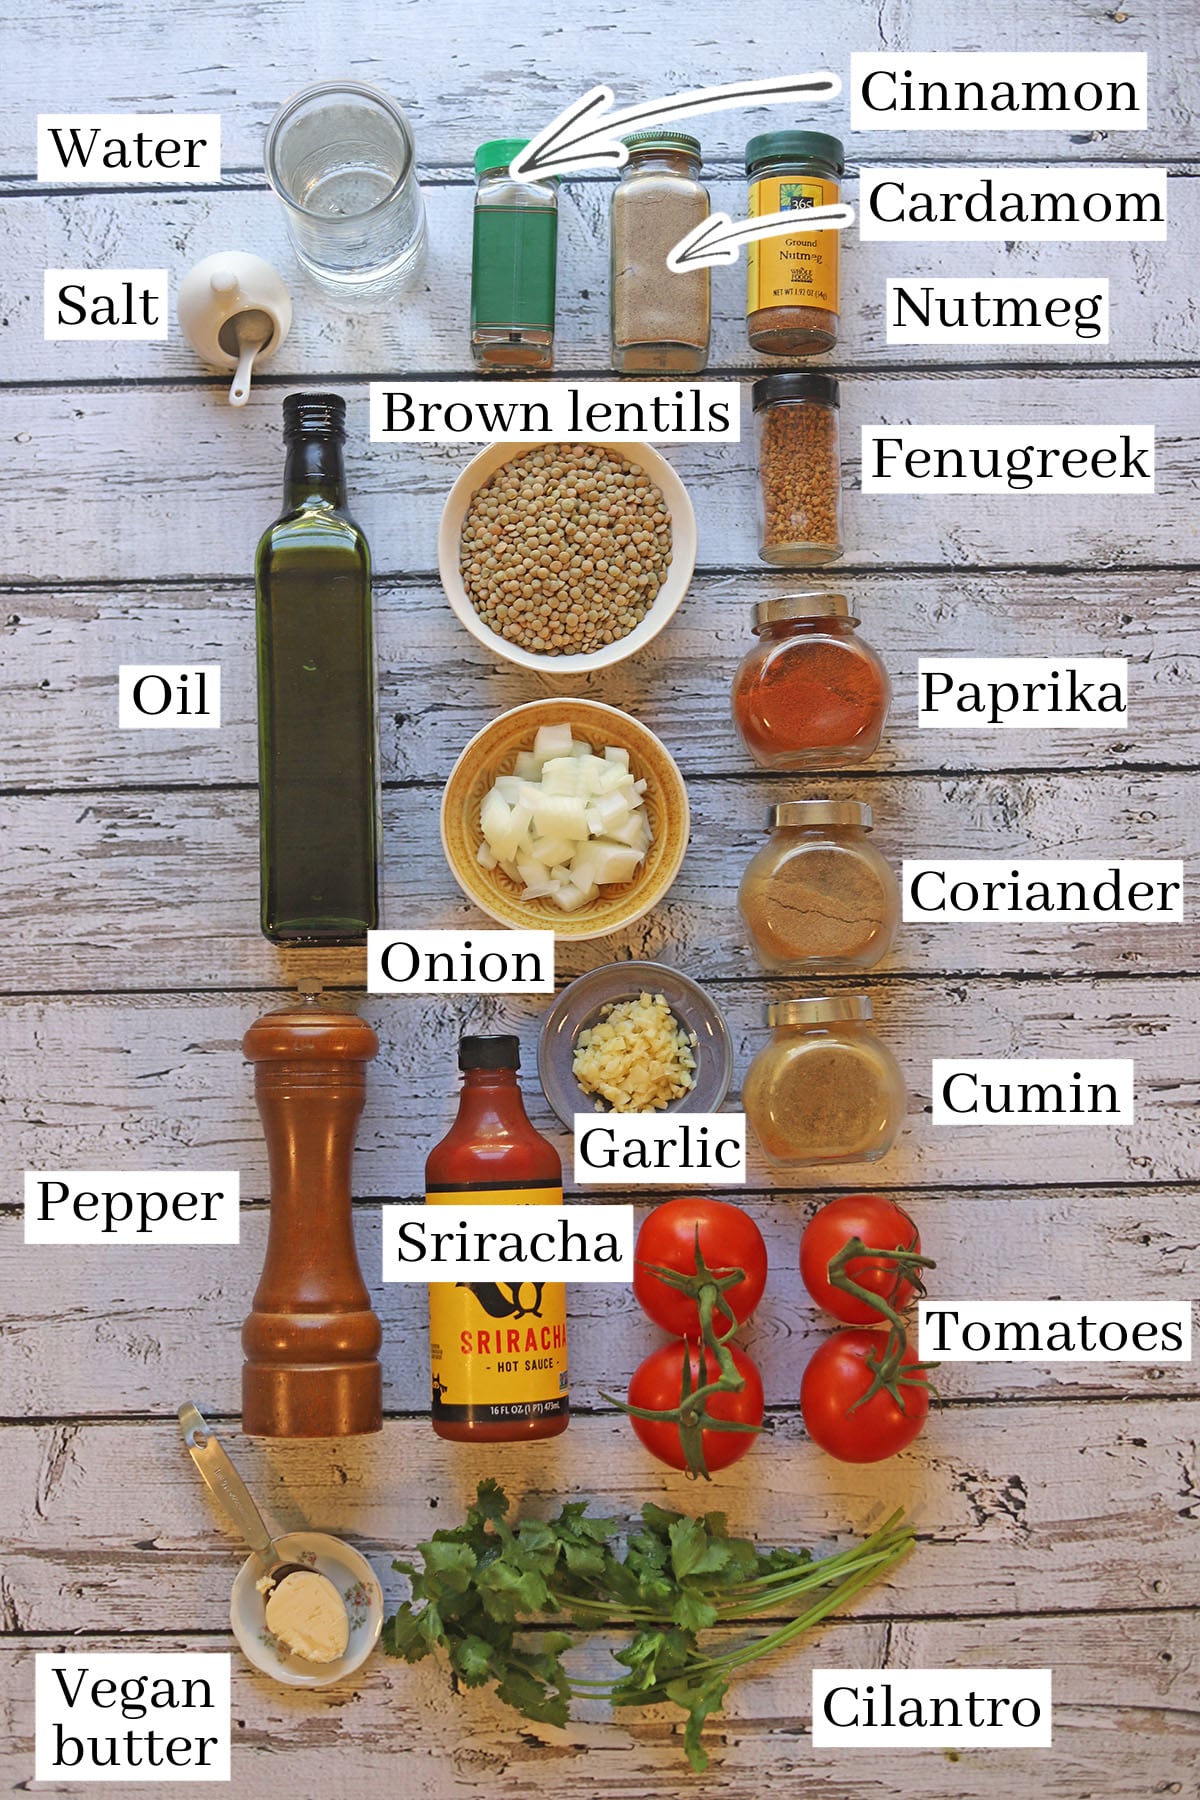 Labeled ingredients for whole masoor dal.